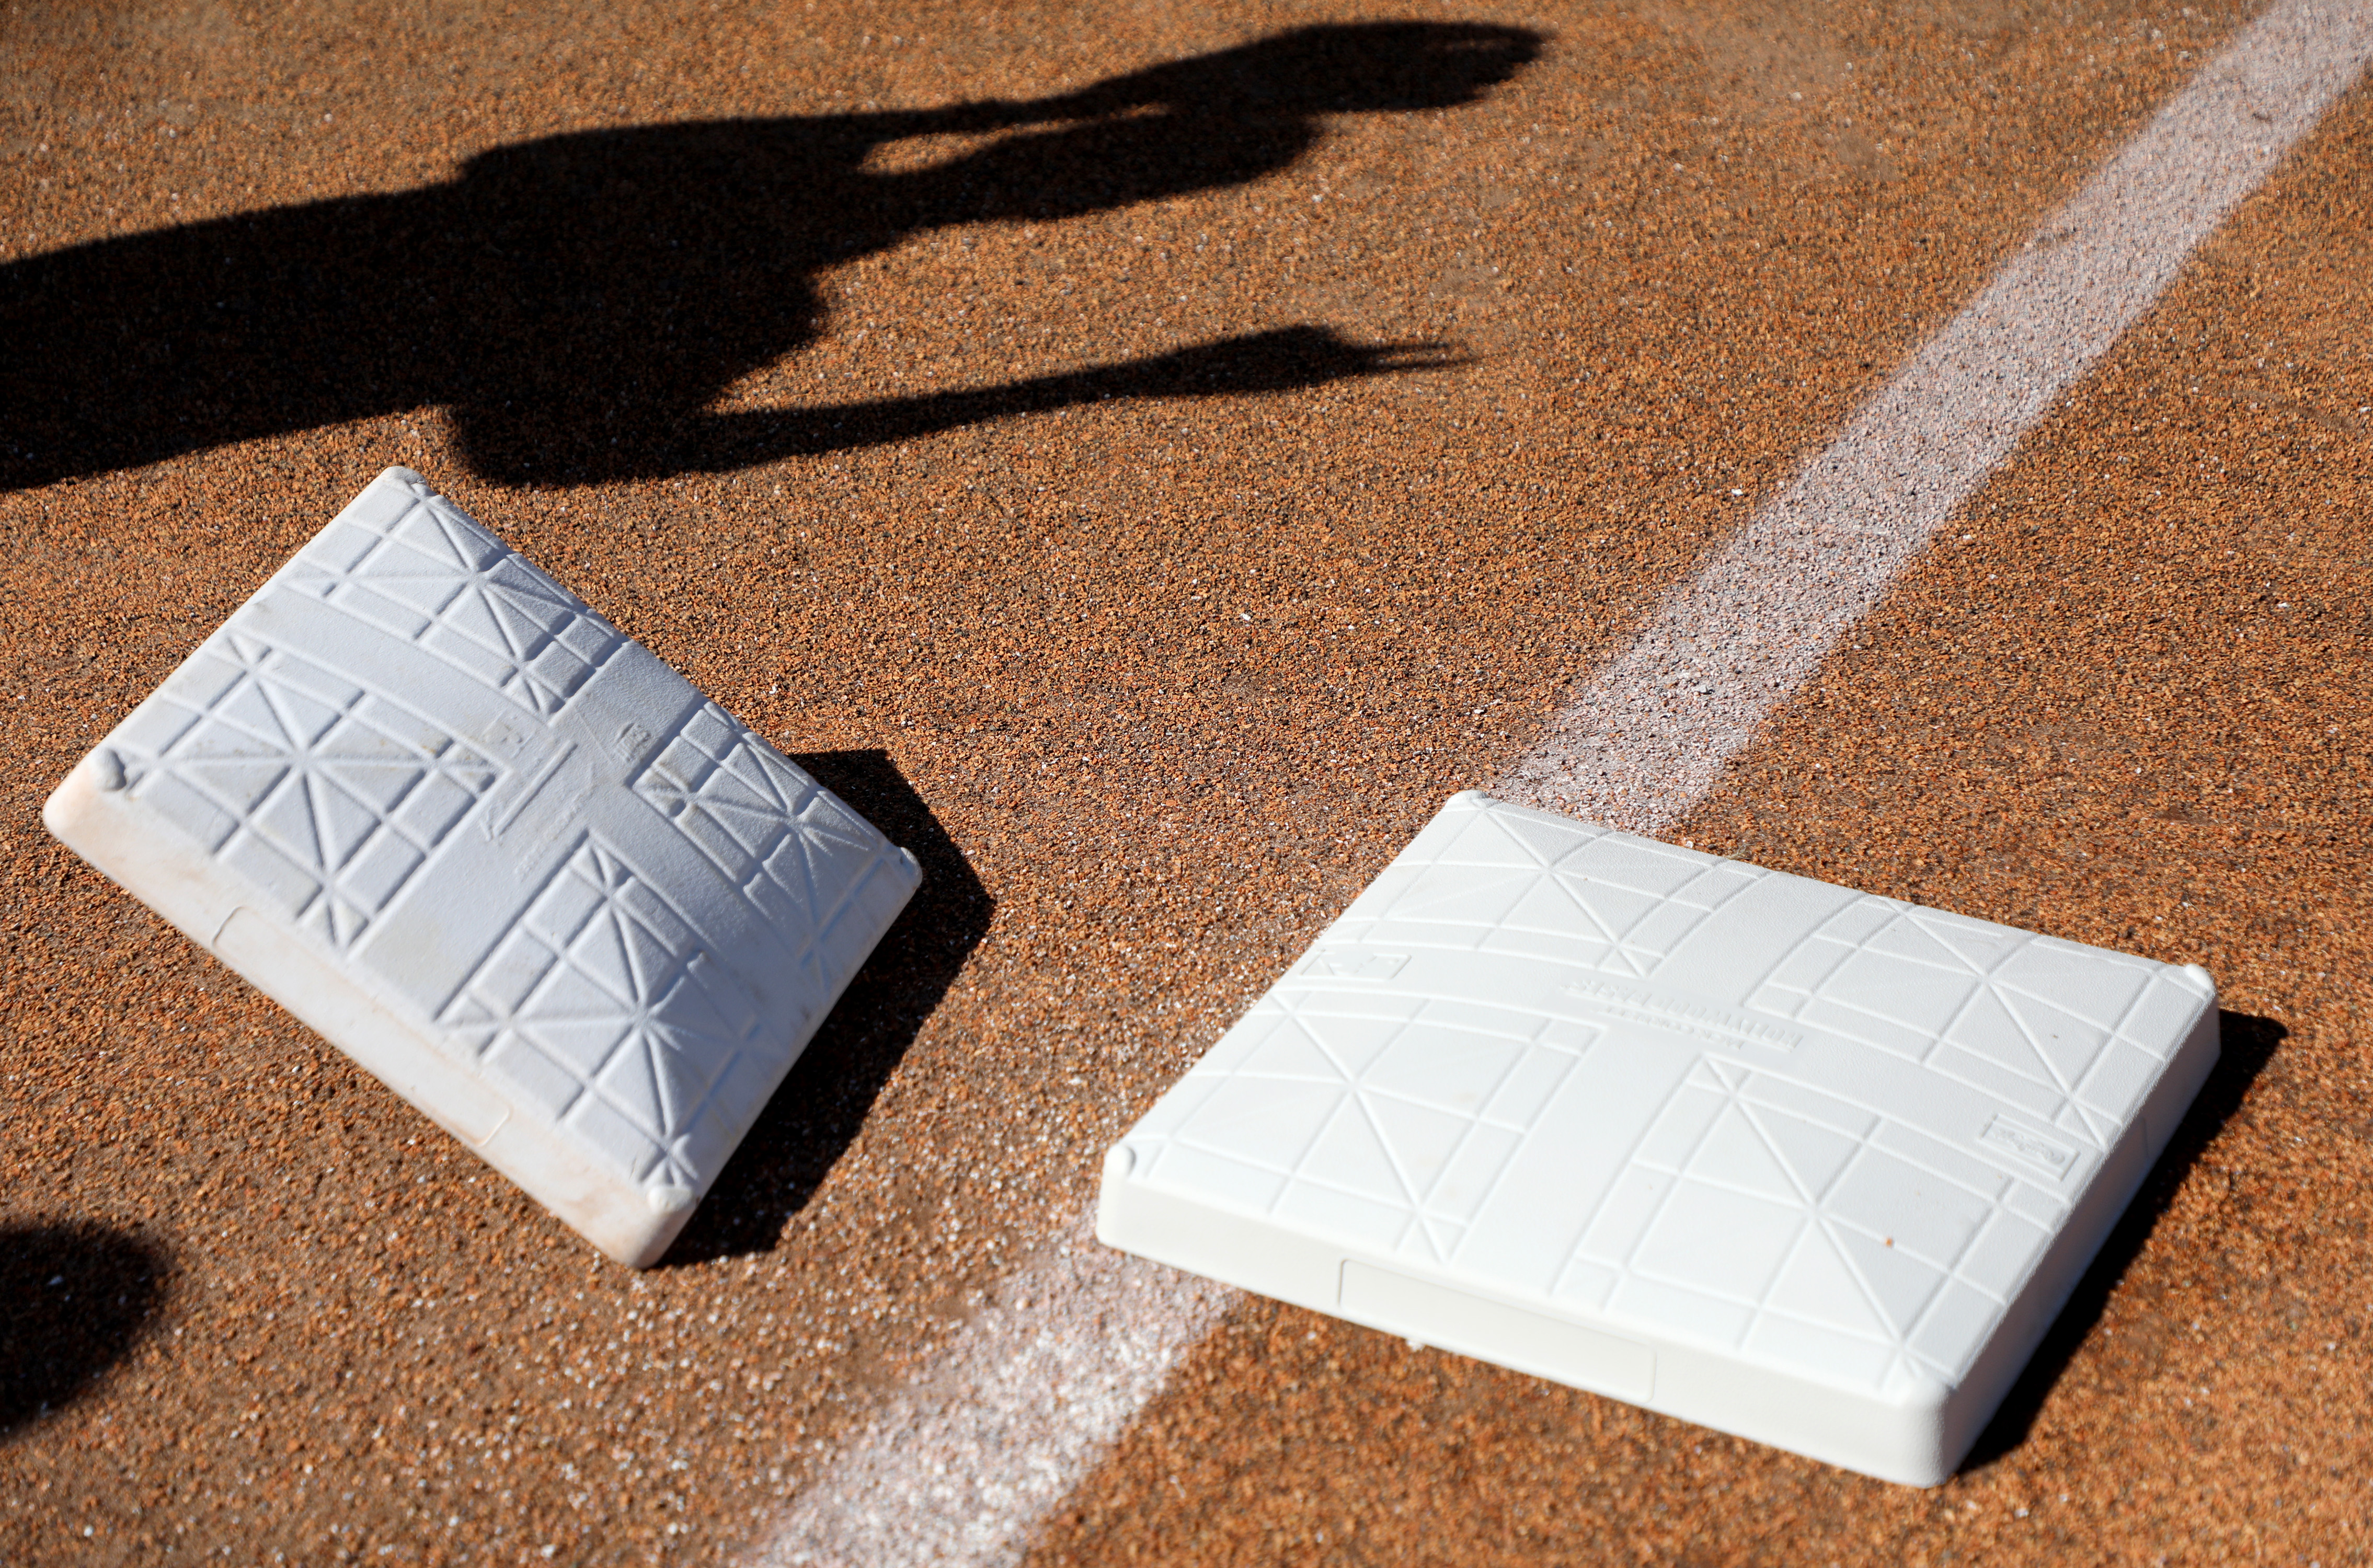 Basepath measurements with new bigger bases